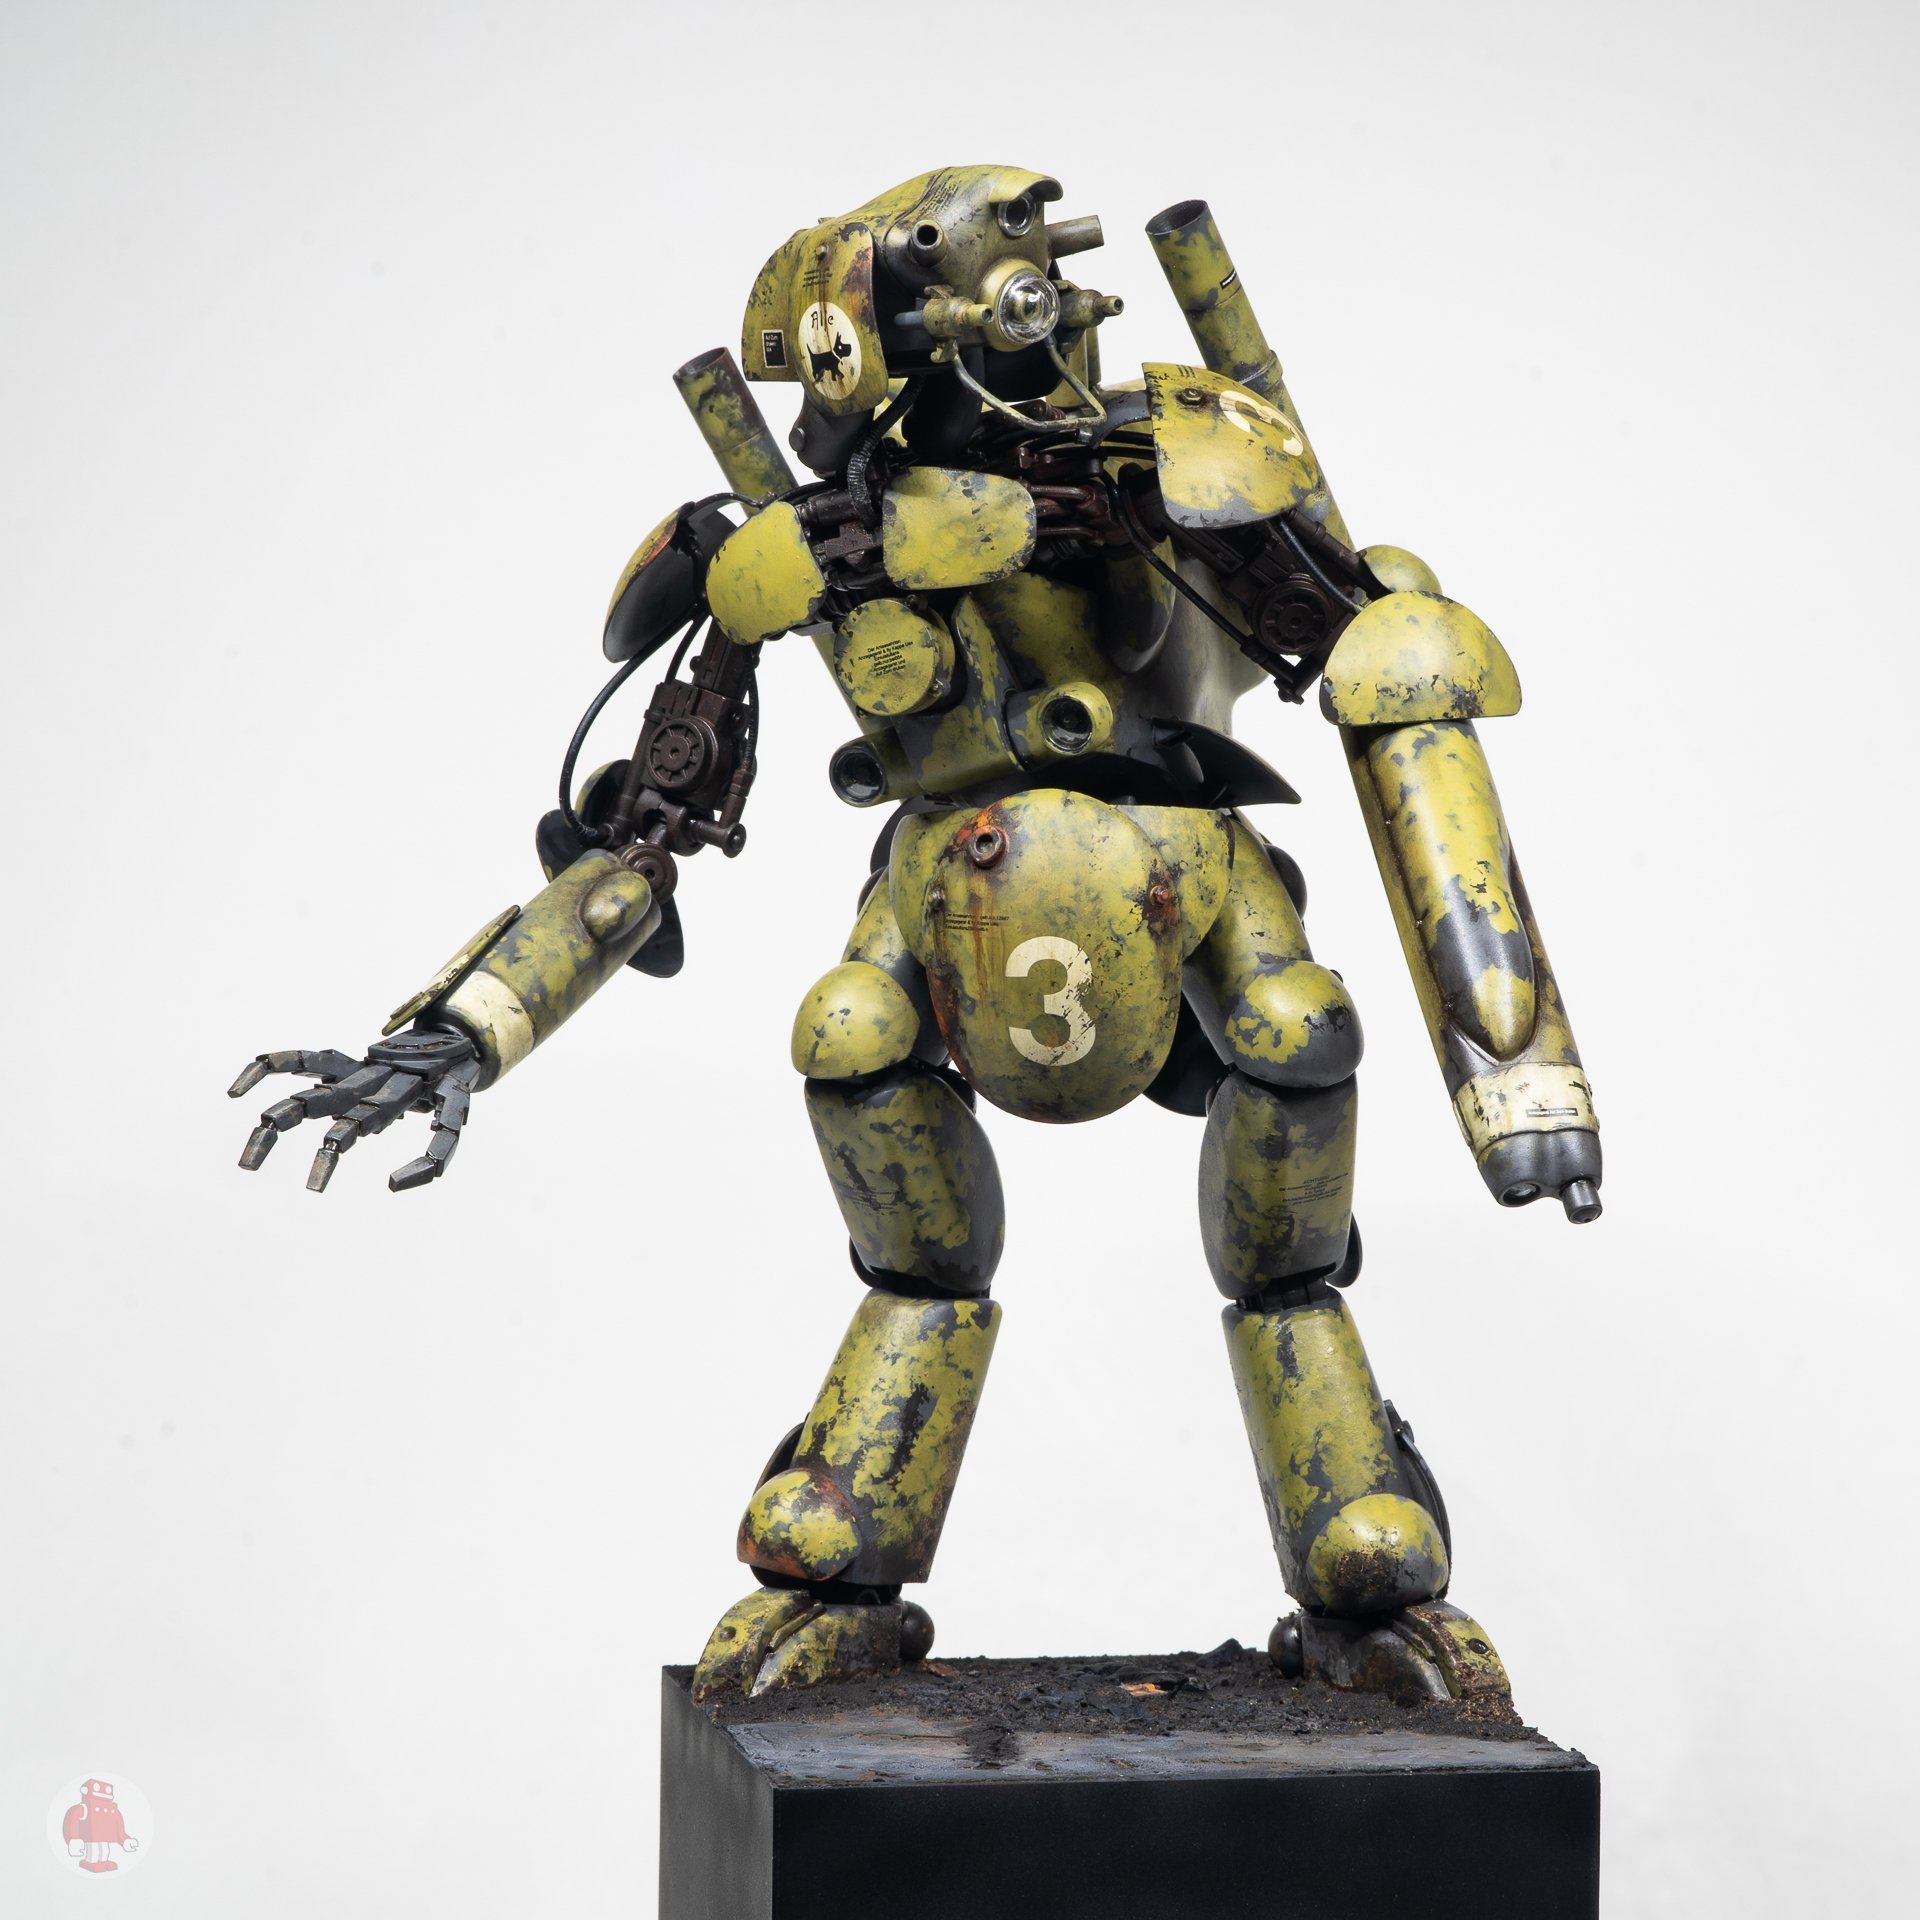 Maschinen Krieger Early Großer Hund Gallery by Lincoln Wright-1.jpg